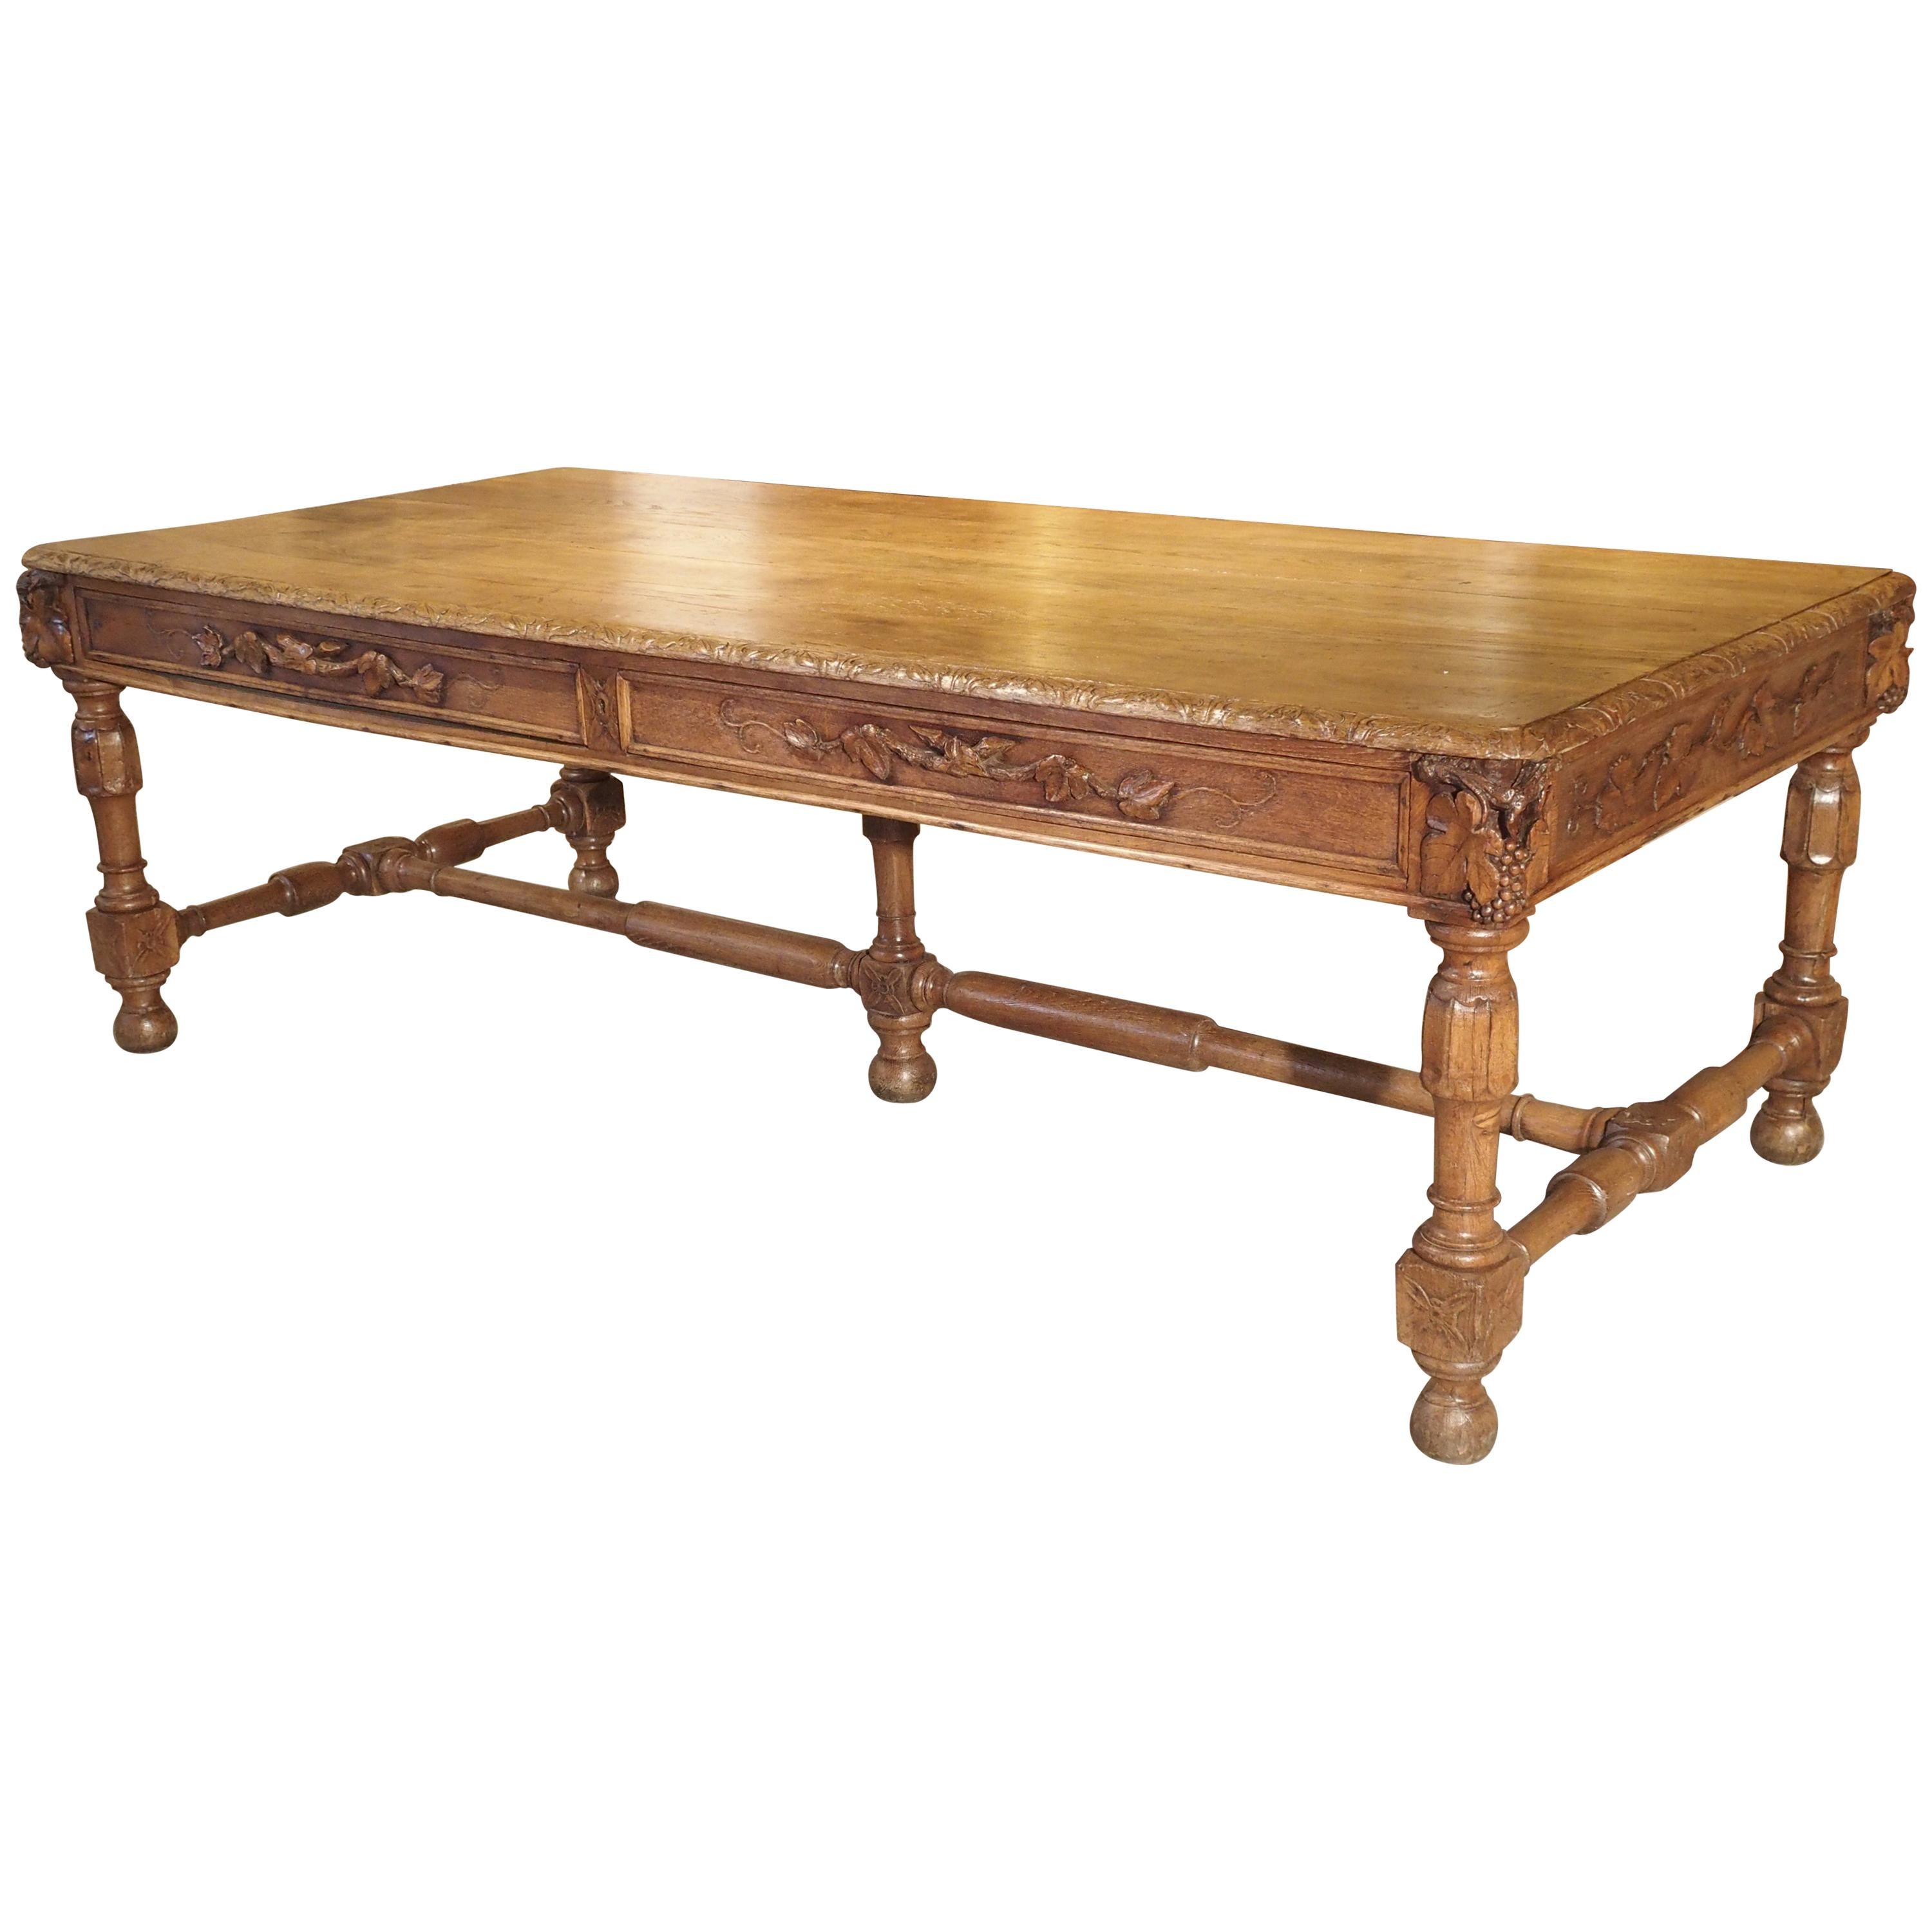 Early 1800s Carved French Oak Vineyard Table